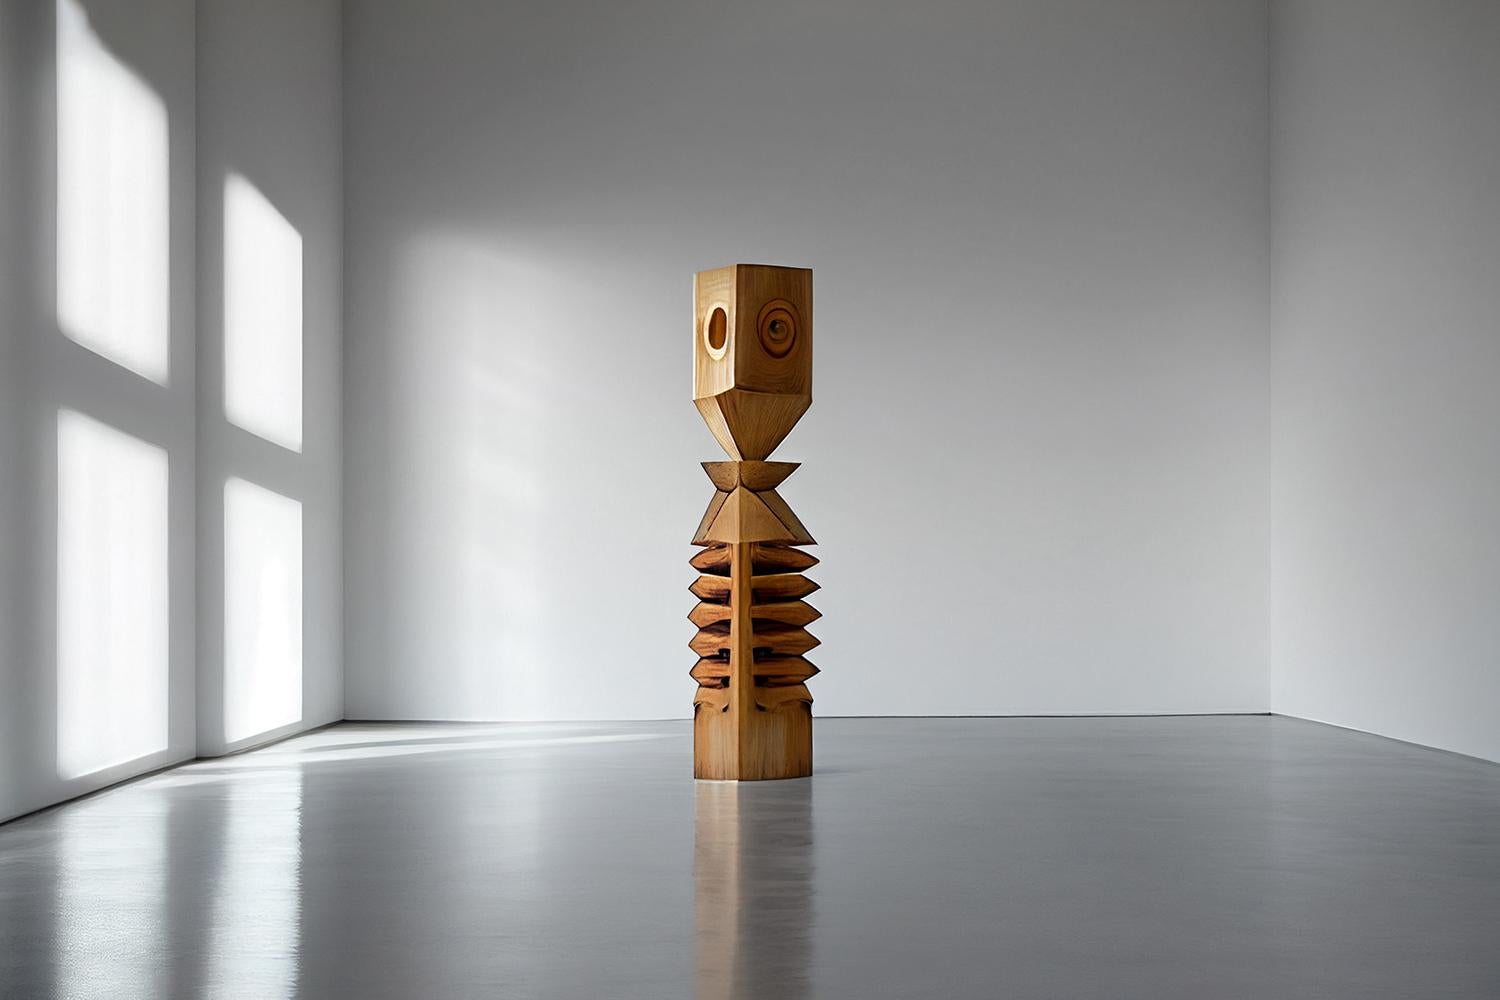 Figurative Wood Sculpture Inspired in Constantin Brancusi art, 3 Kings by NONO

NONO Furniture Company introduces the 3 Kings, a set of three monumental totems inspired by the works of Constantin Brancusi.
 
The 3 Kings are a handcrafted figurative